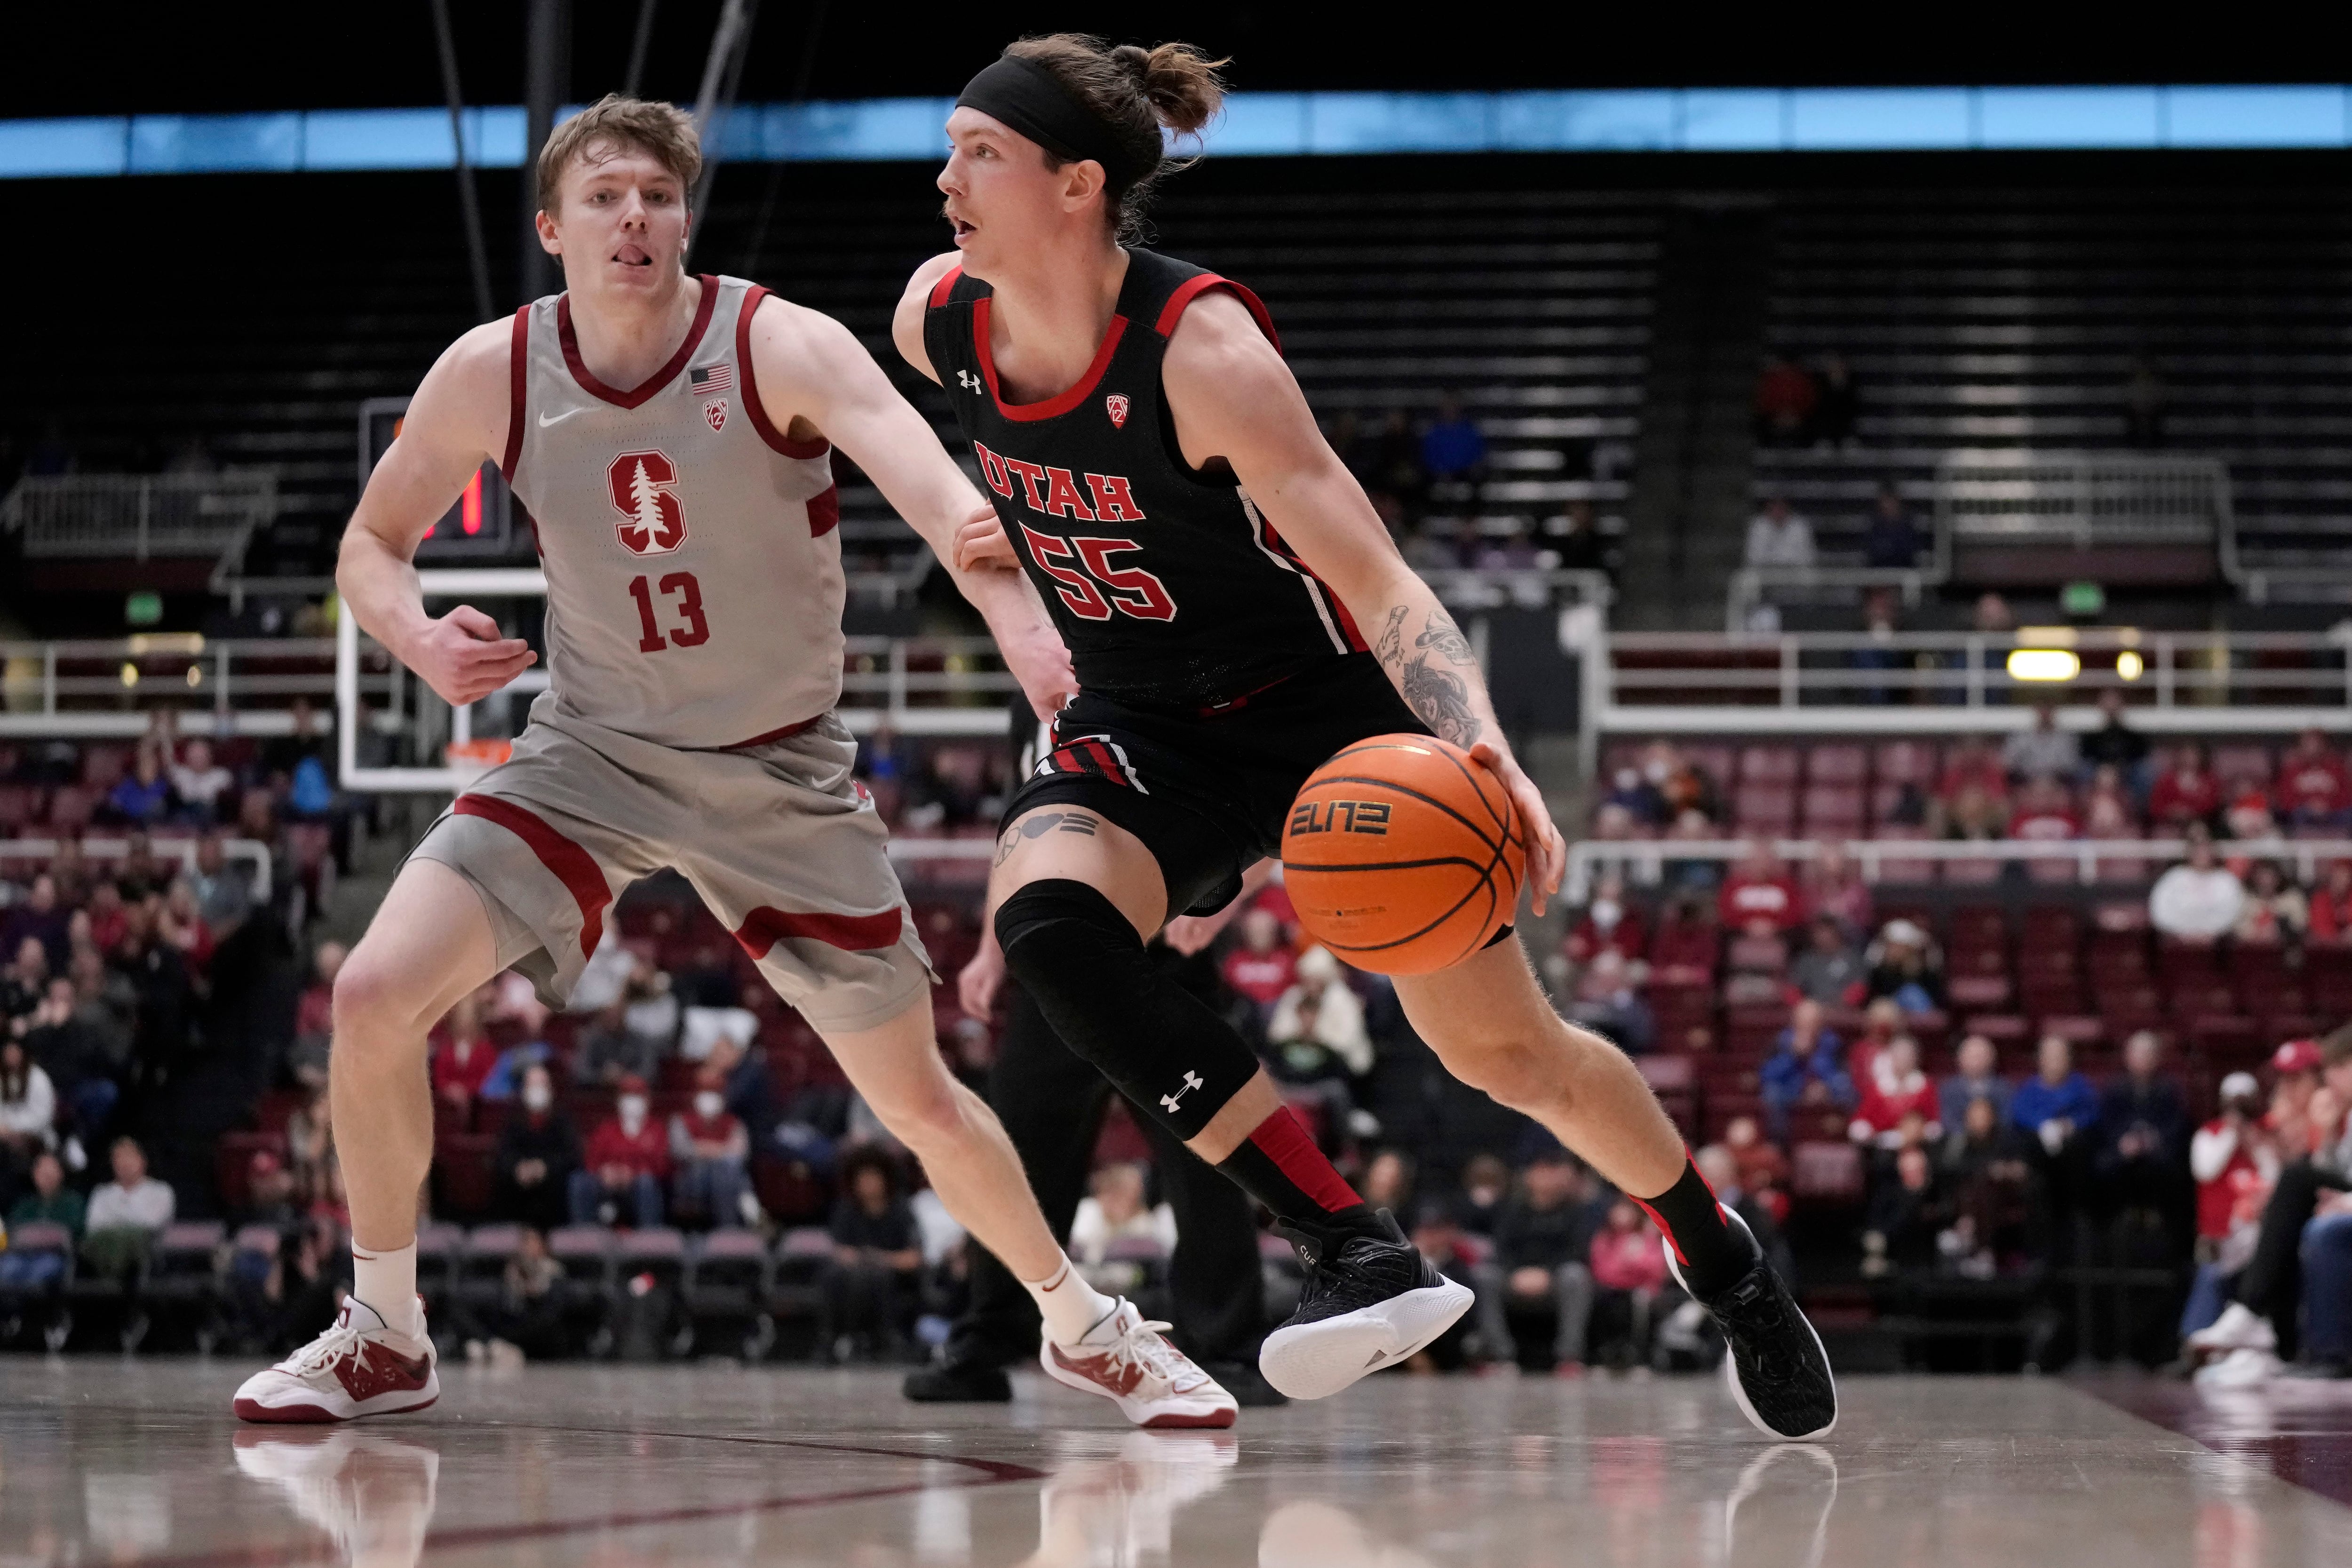 Utah guard Gabe Madsen (55) drives to the basket against Stanford guard Michael Jones (13) during the second half of an NCAA college basketball game in Stanford, Calif., Saturday, Dec. 31, 2022. (AP Photo/Jeff Chiu)